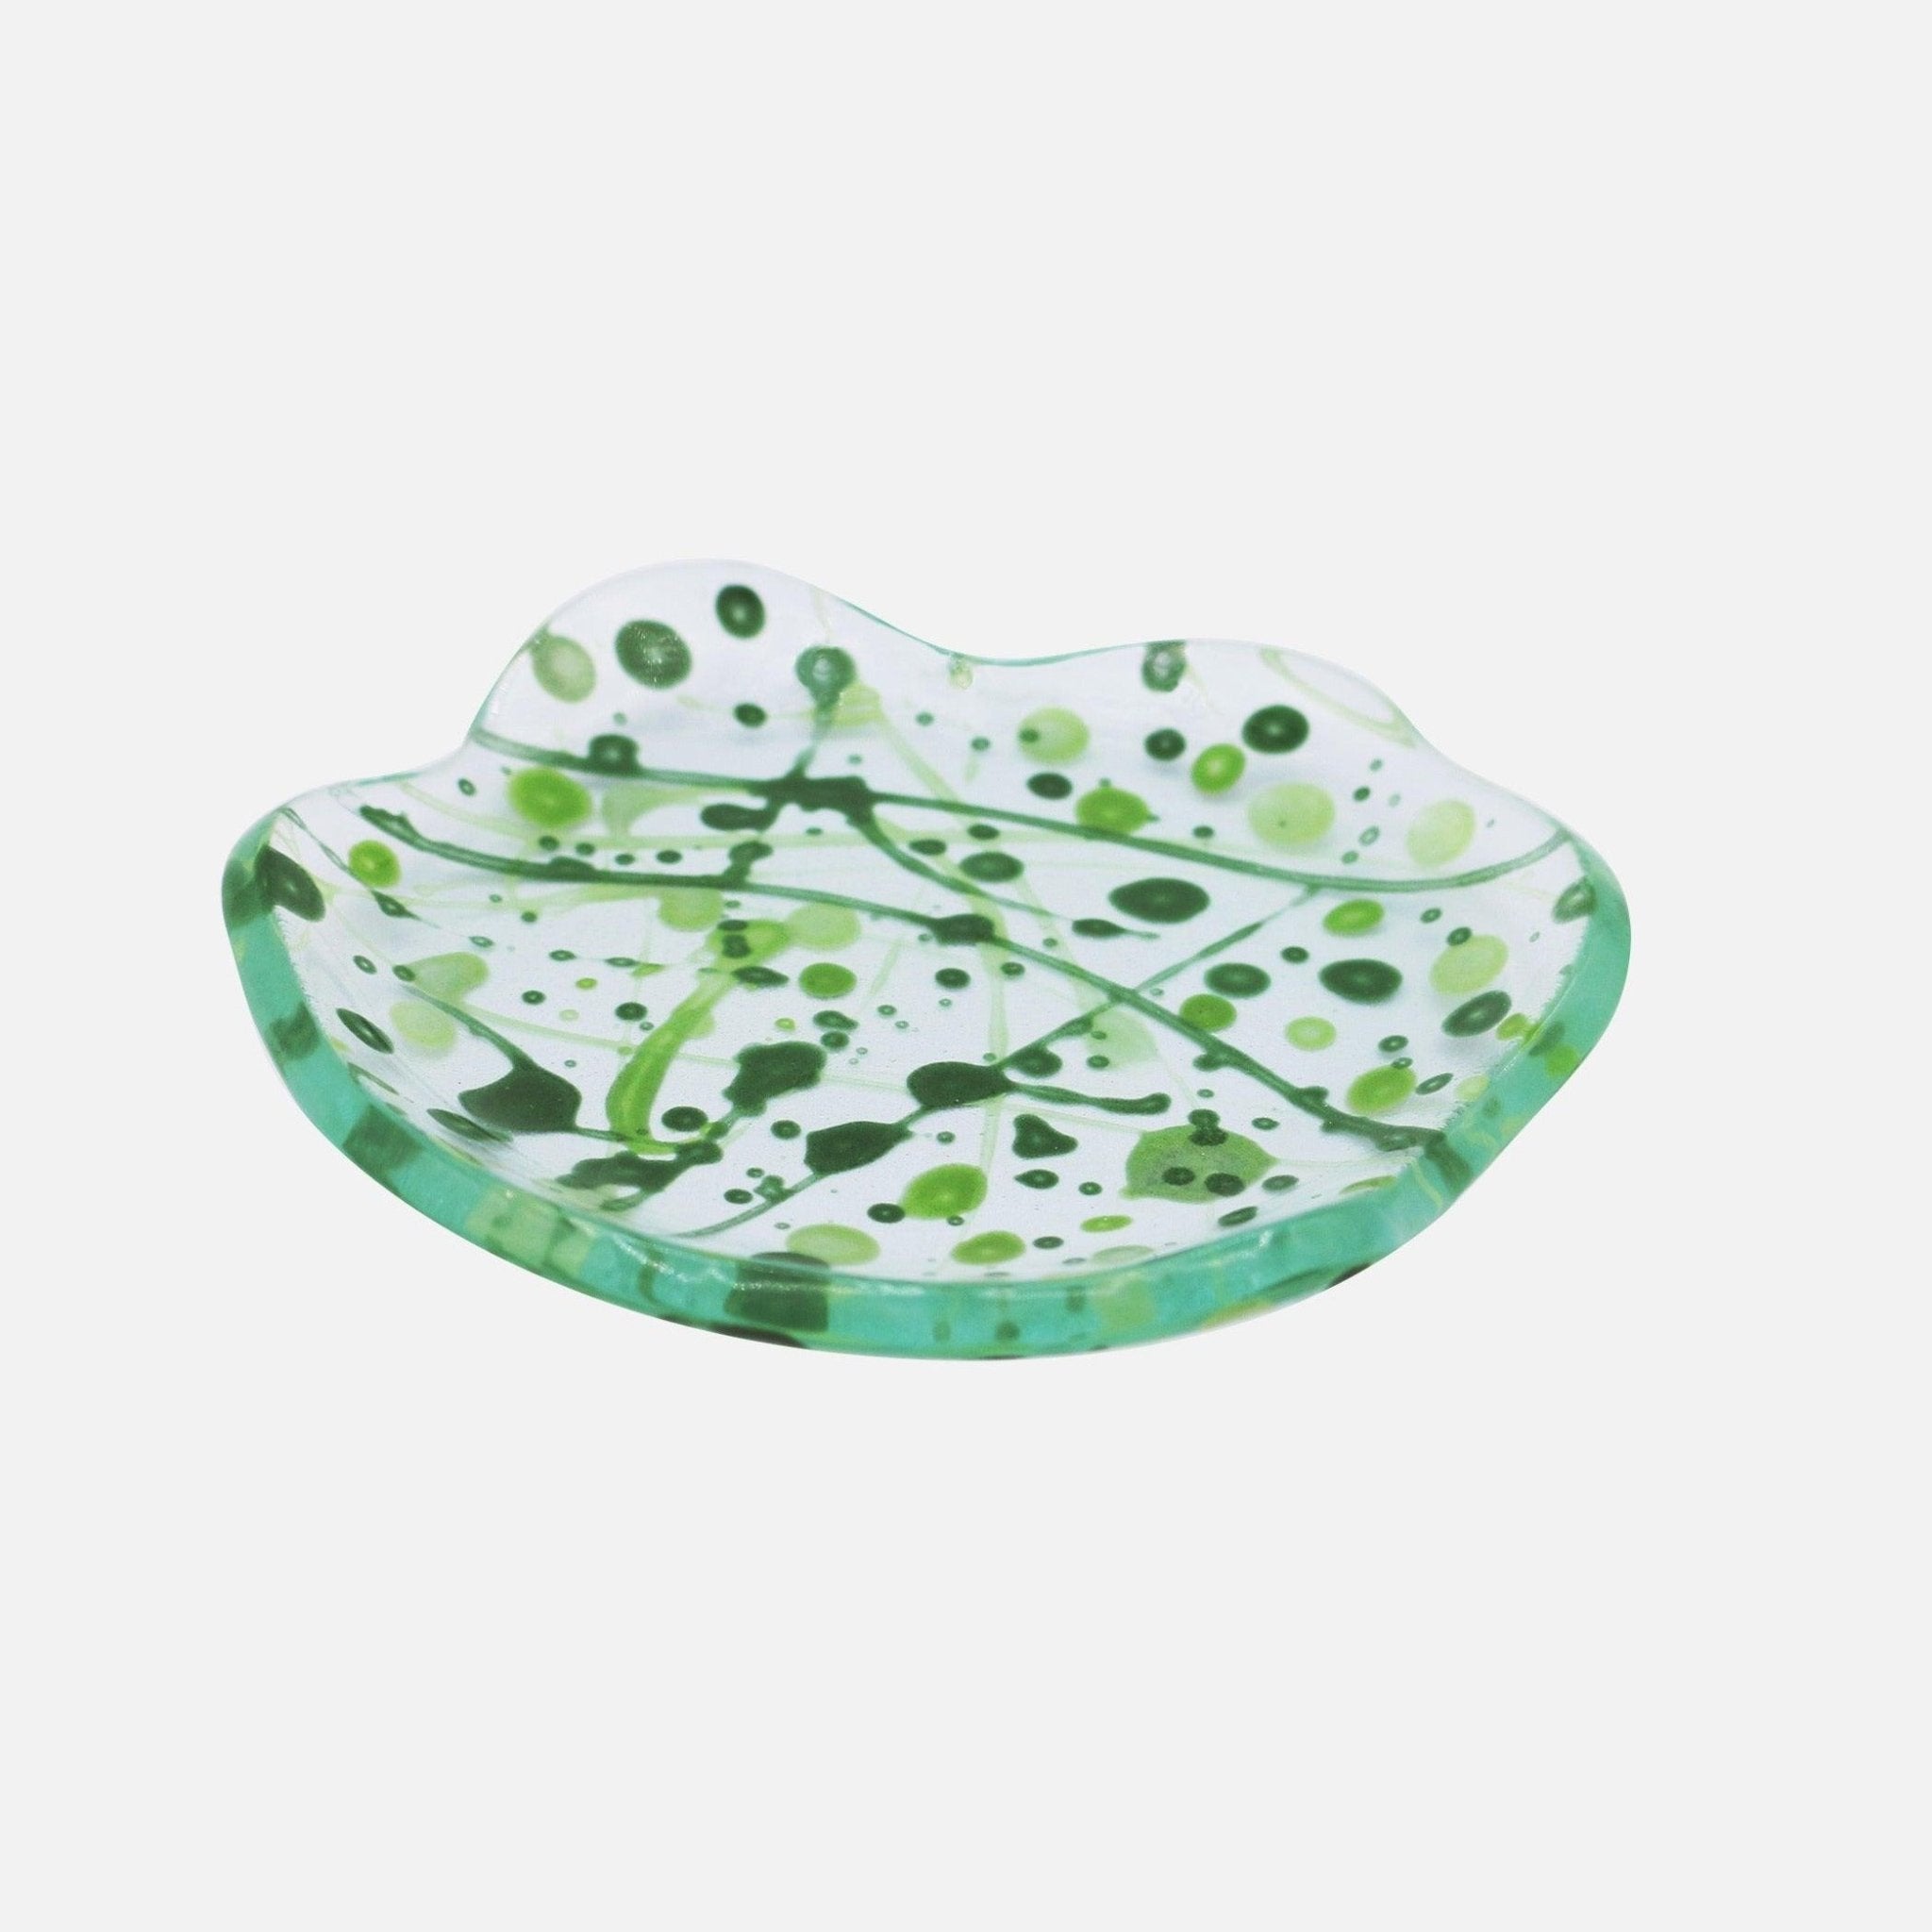 Splatter Glass Tray, Forest Green - At Present